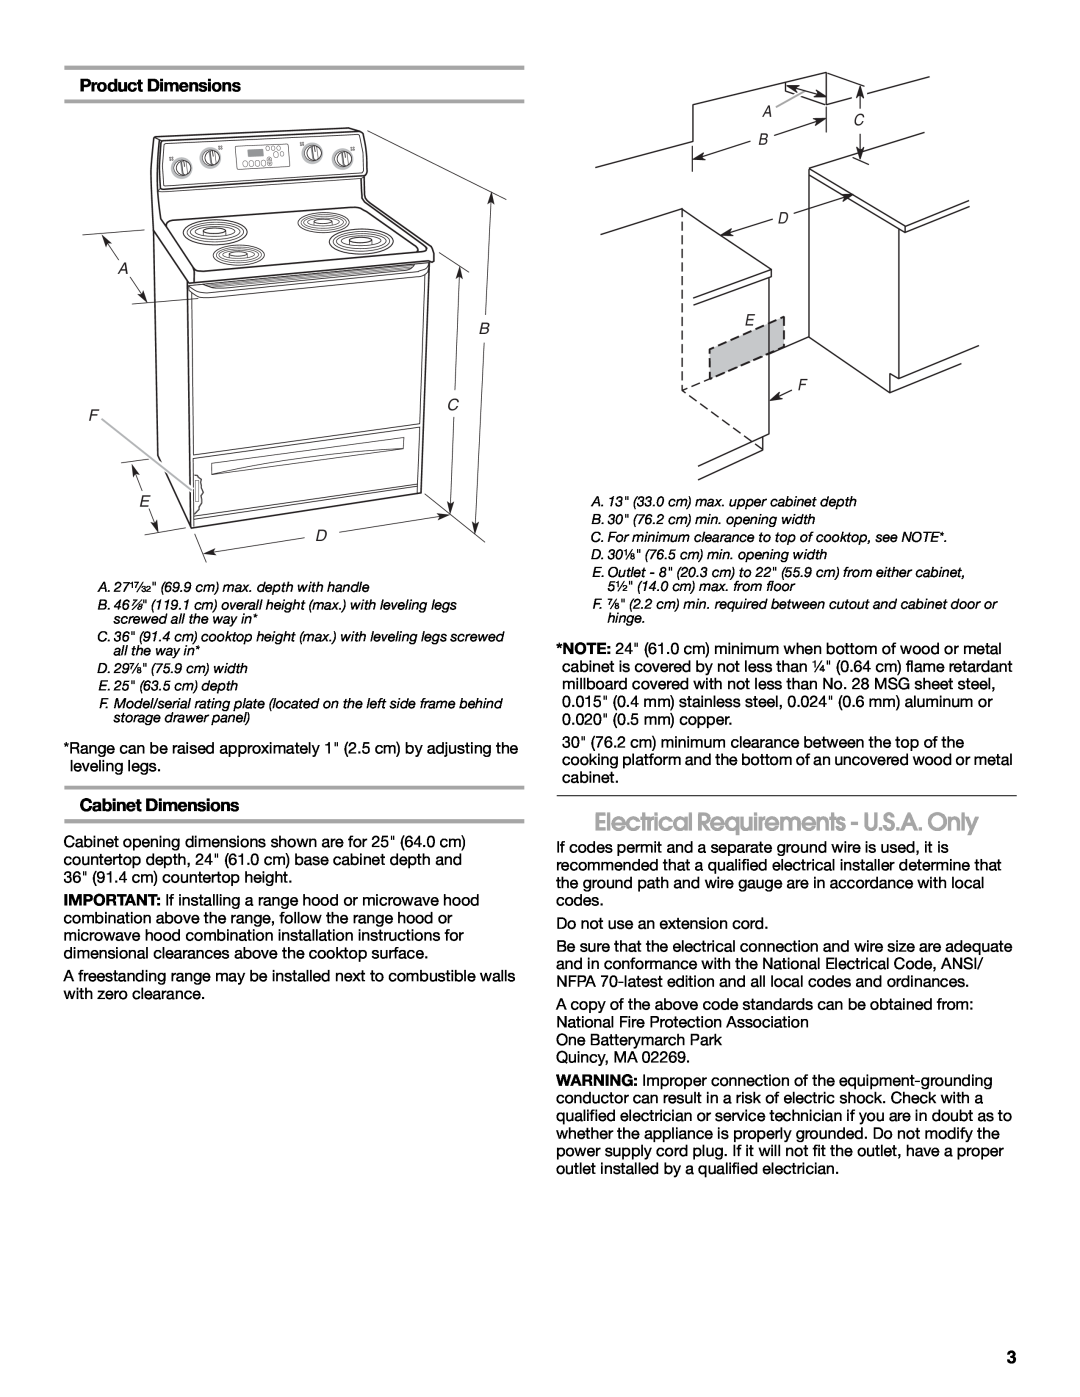 Amana W10196158B Electrical Requirements - U.S.A. Only, Product Dimensions, Cabinet Dimensions, A C B D 